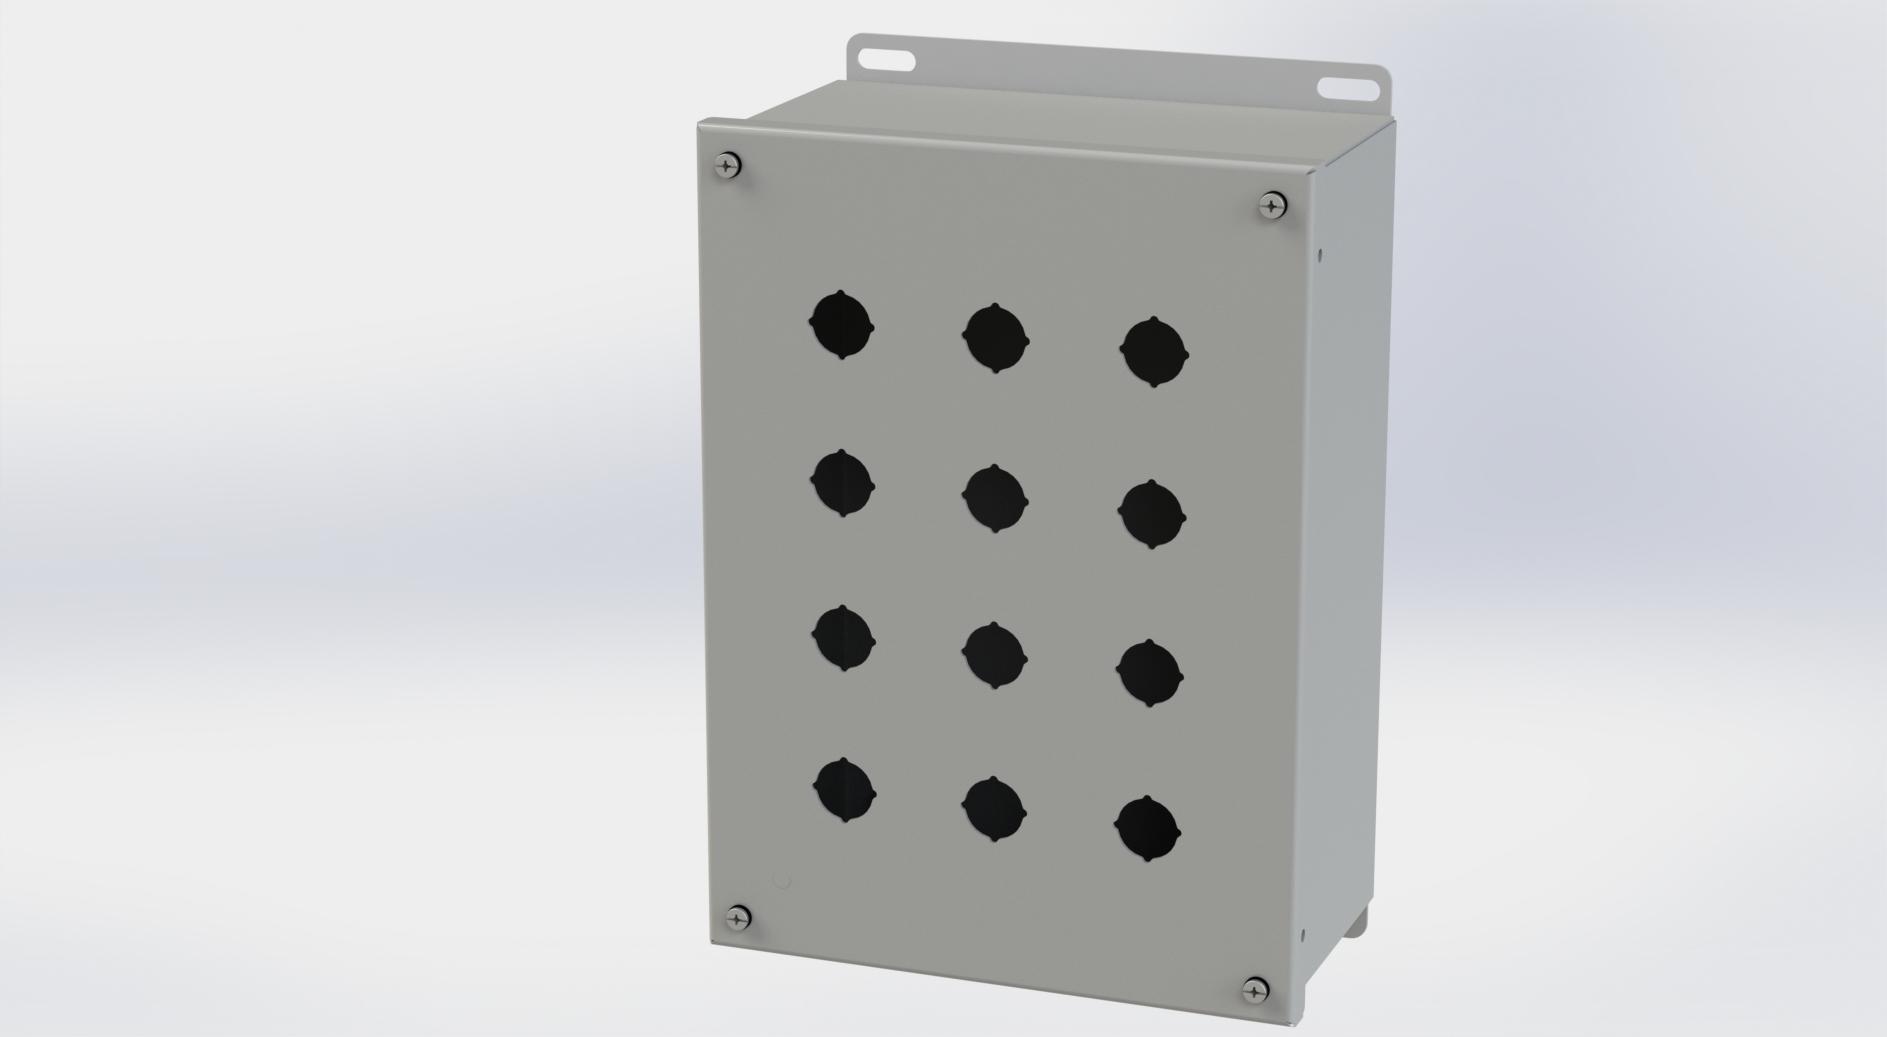 Saginaw Control SCE-12PBXI PBXI Enclosure, Height:11.75", Width:8.50", Depth:4.75", ANSI-61 gray powder coating inside and out.